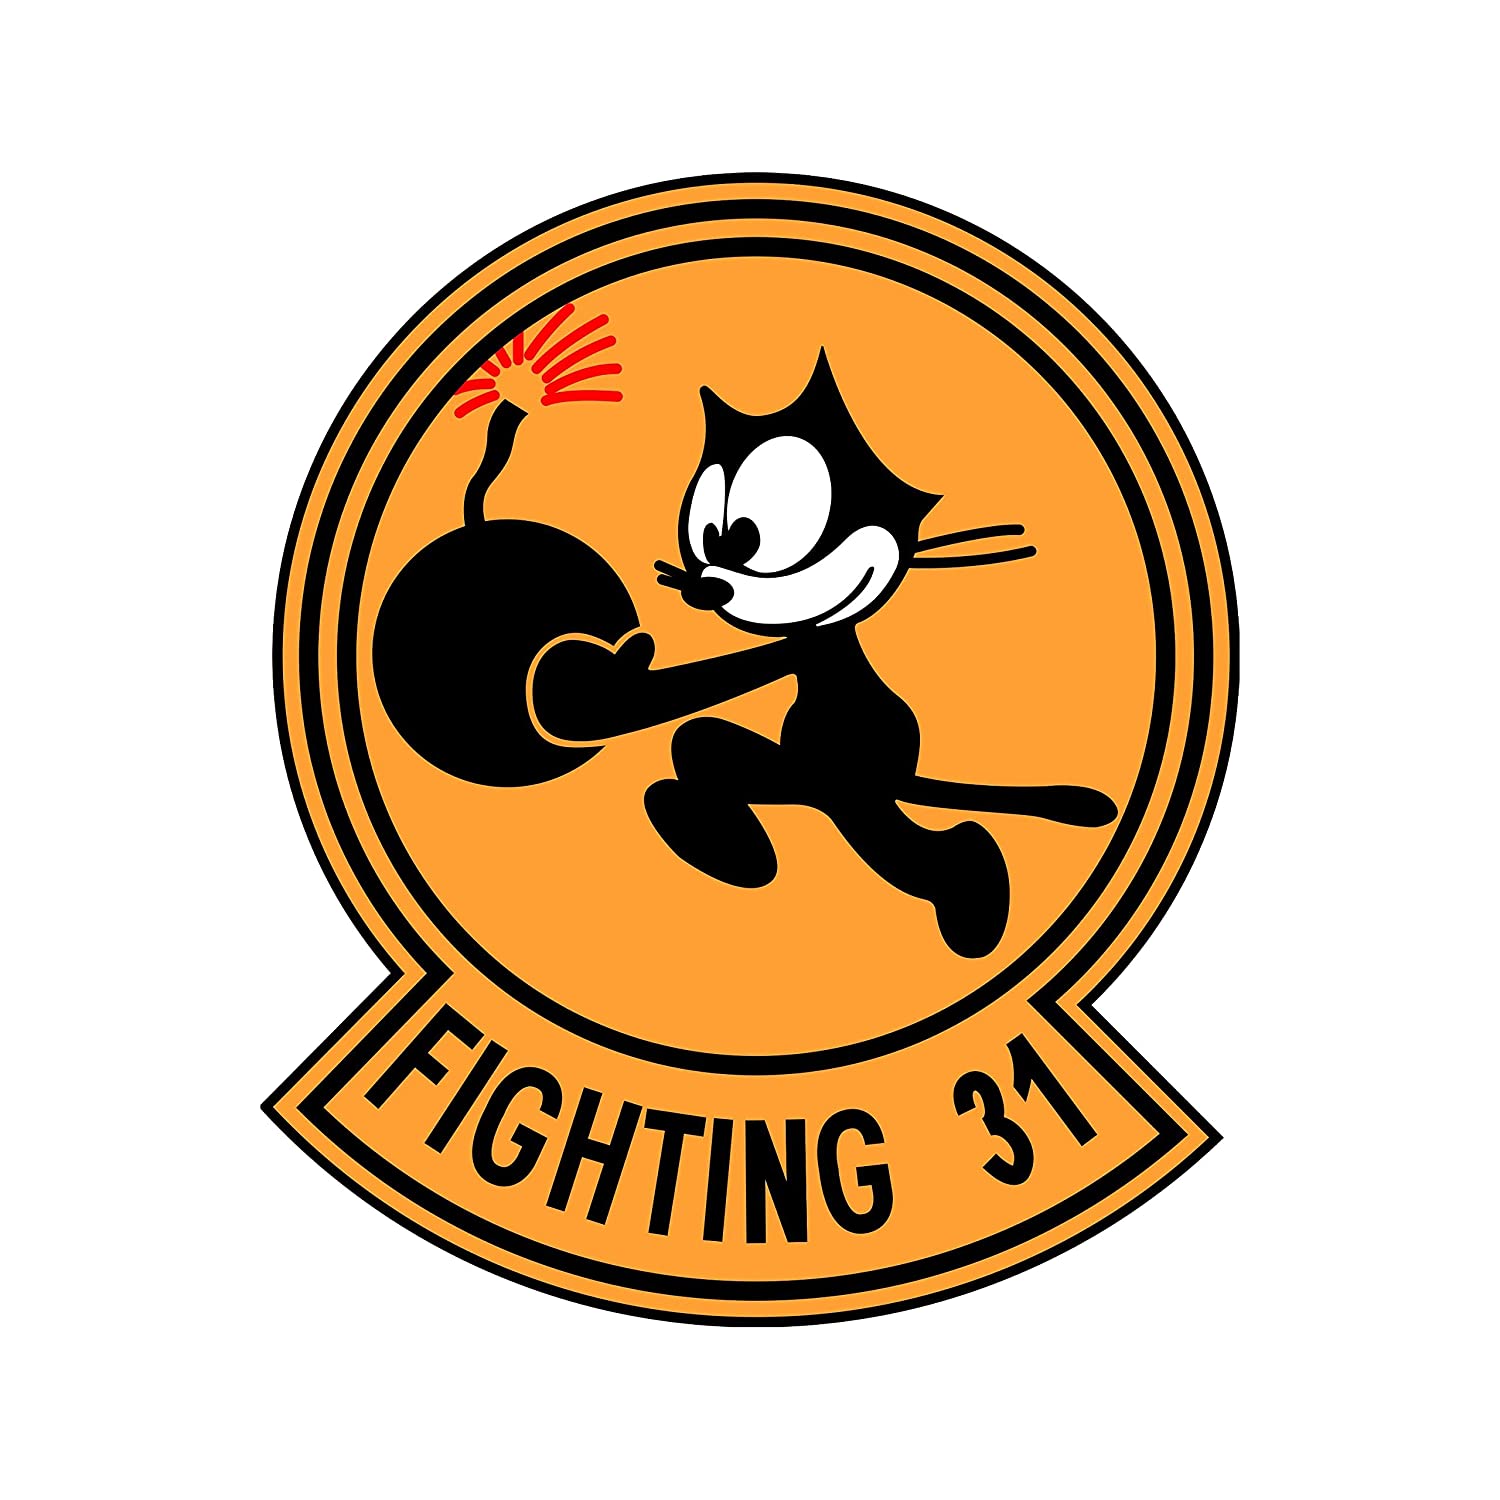 31st Fighting Squadron Patch - Patch Vinyl Decal - Available in Multiple Sizes